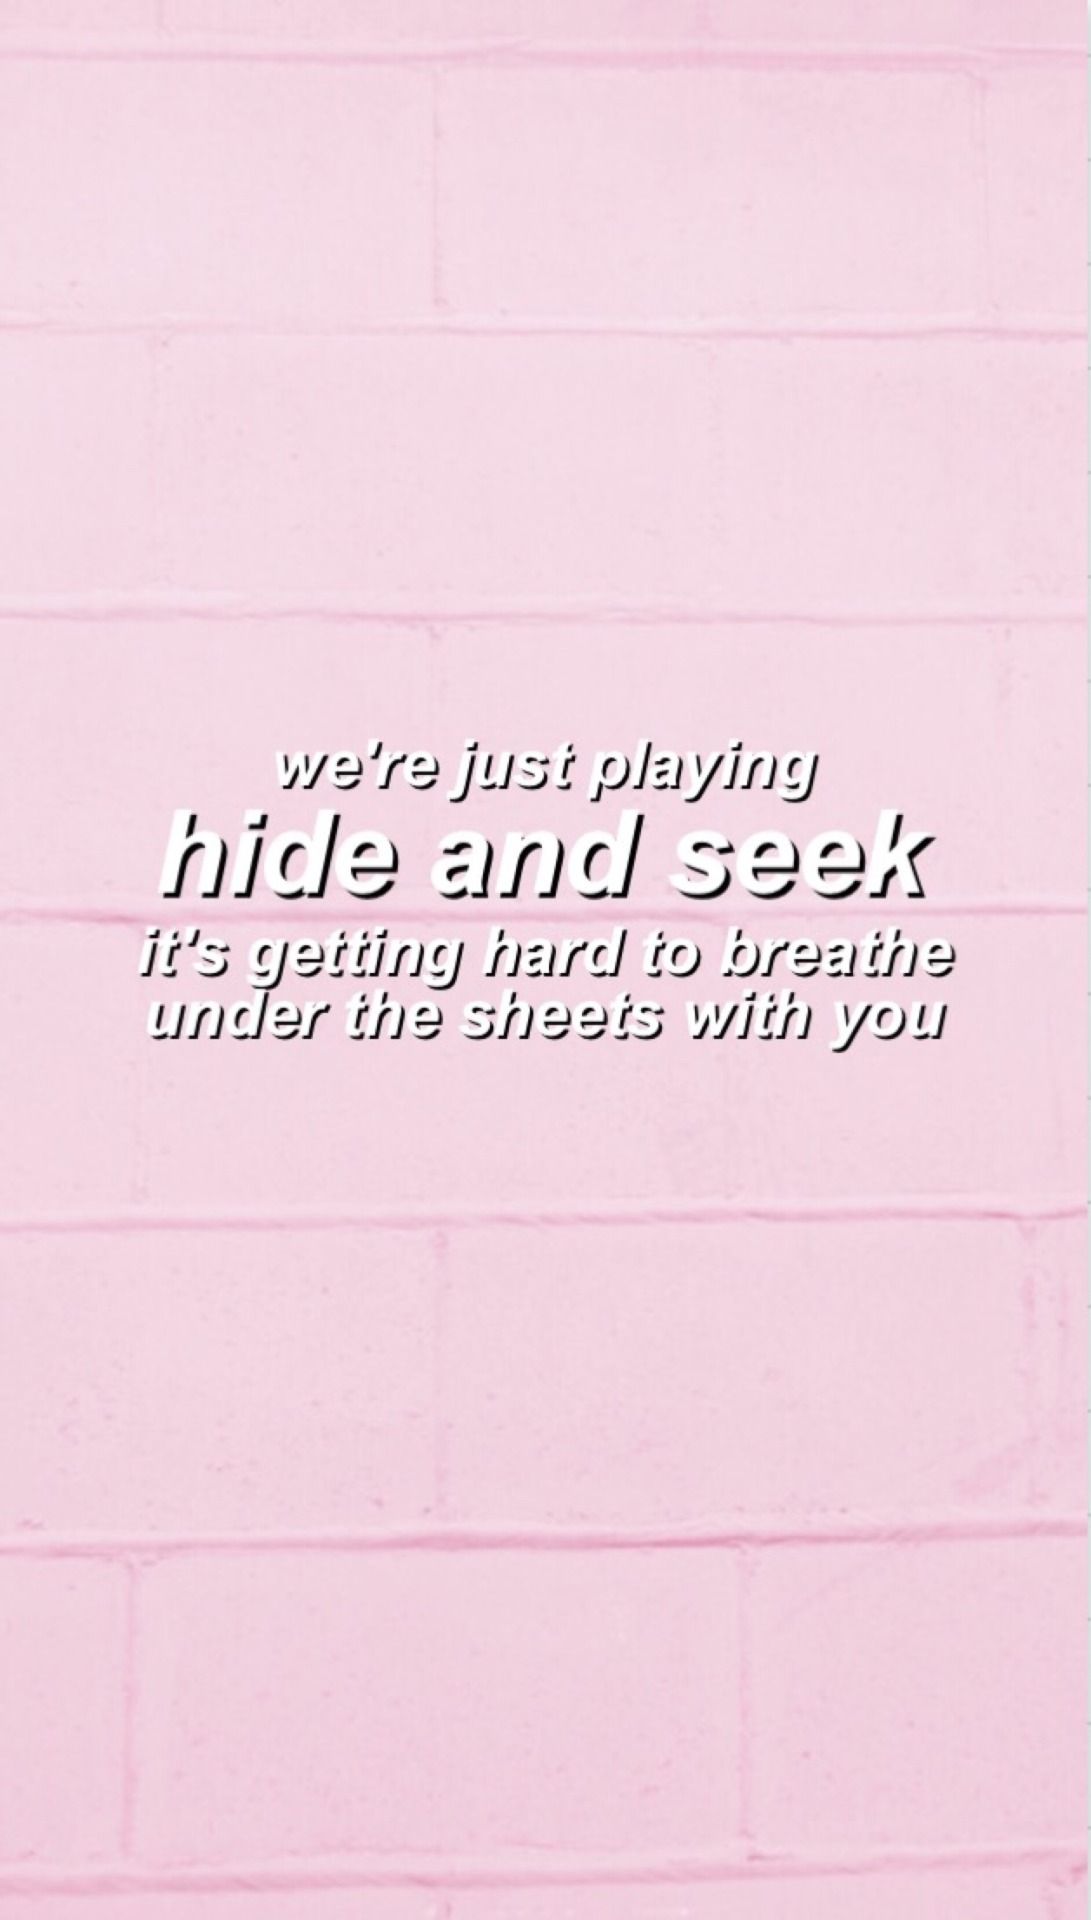 We're just playing hide and seek, it's getting hard to breathe under the sheets with you. - Melanie Martinez